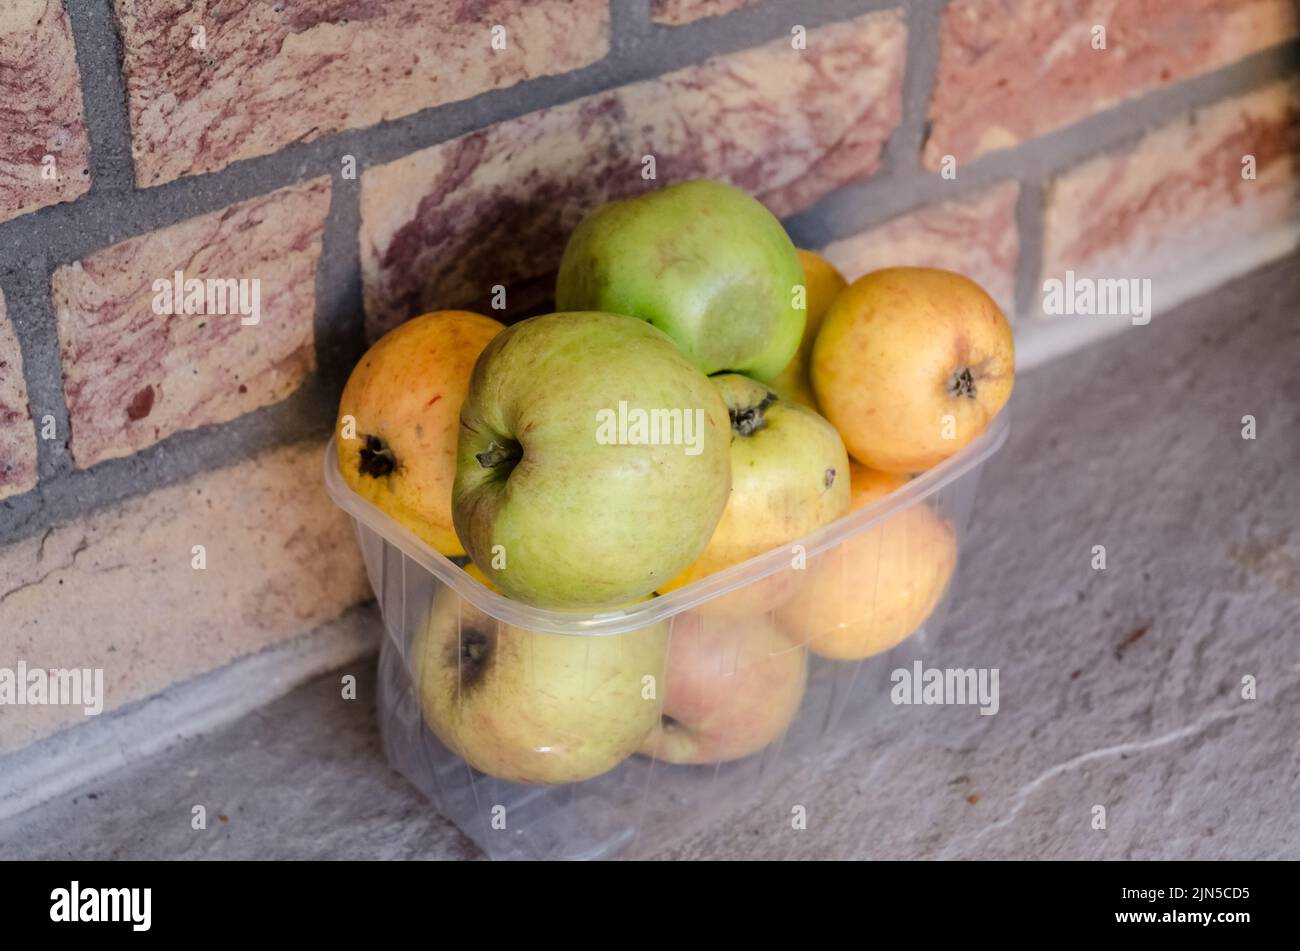 Green and yellow apples in a plastic bowl Stock Photo